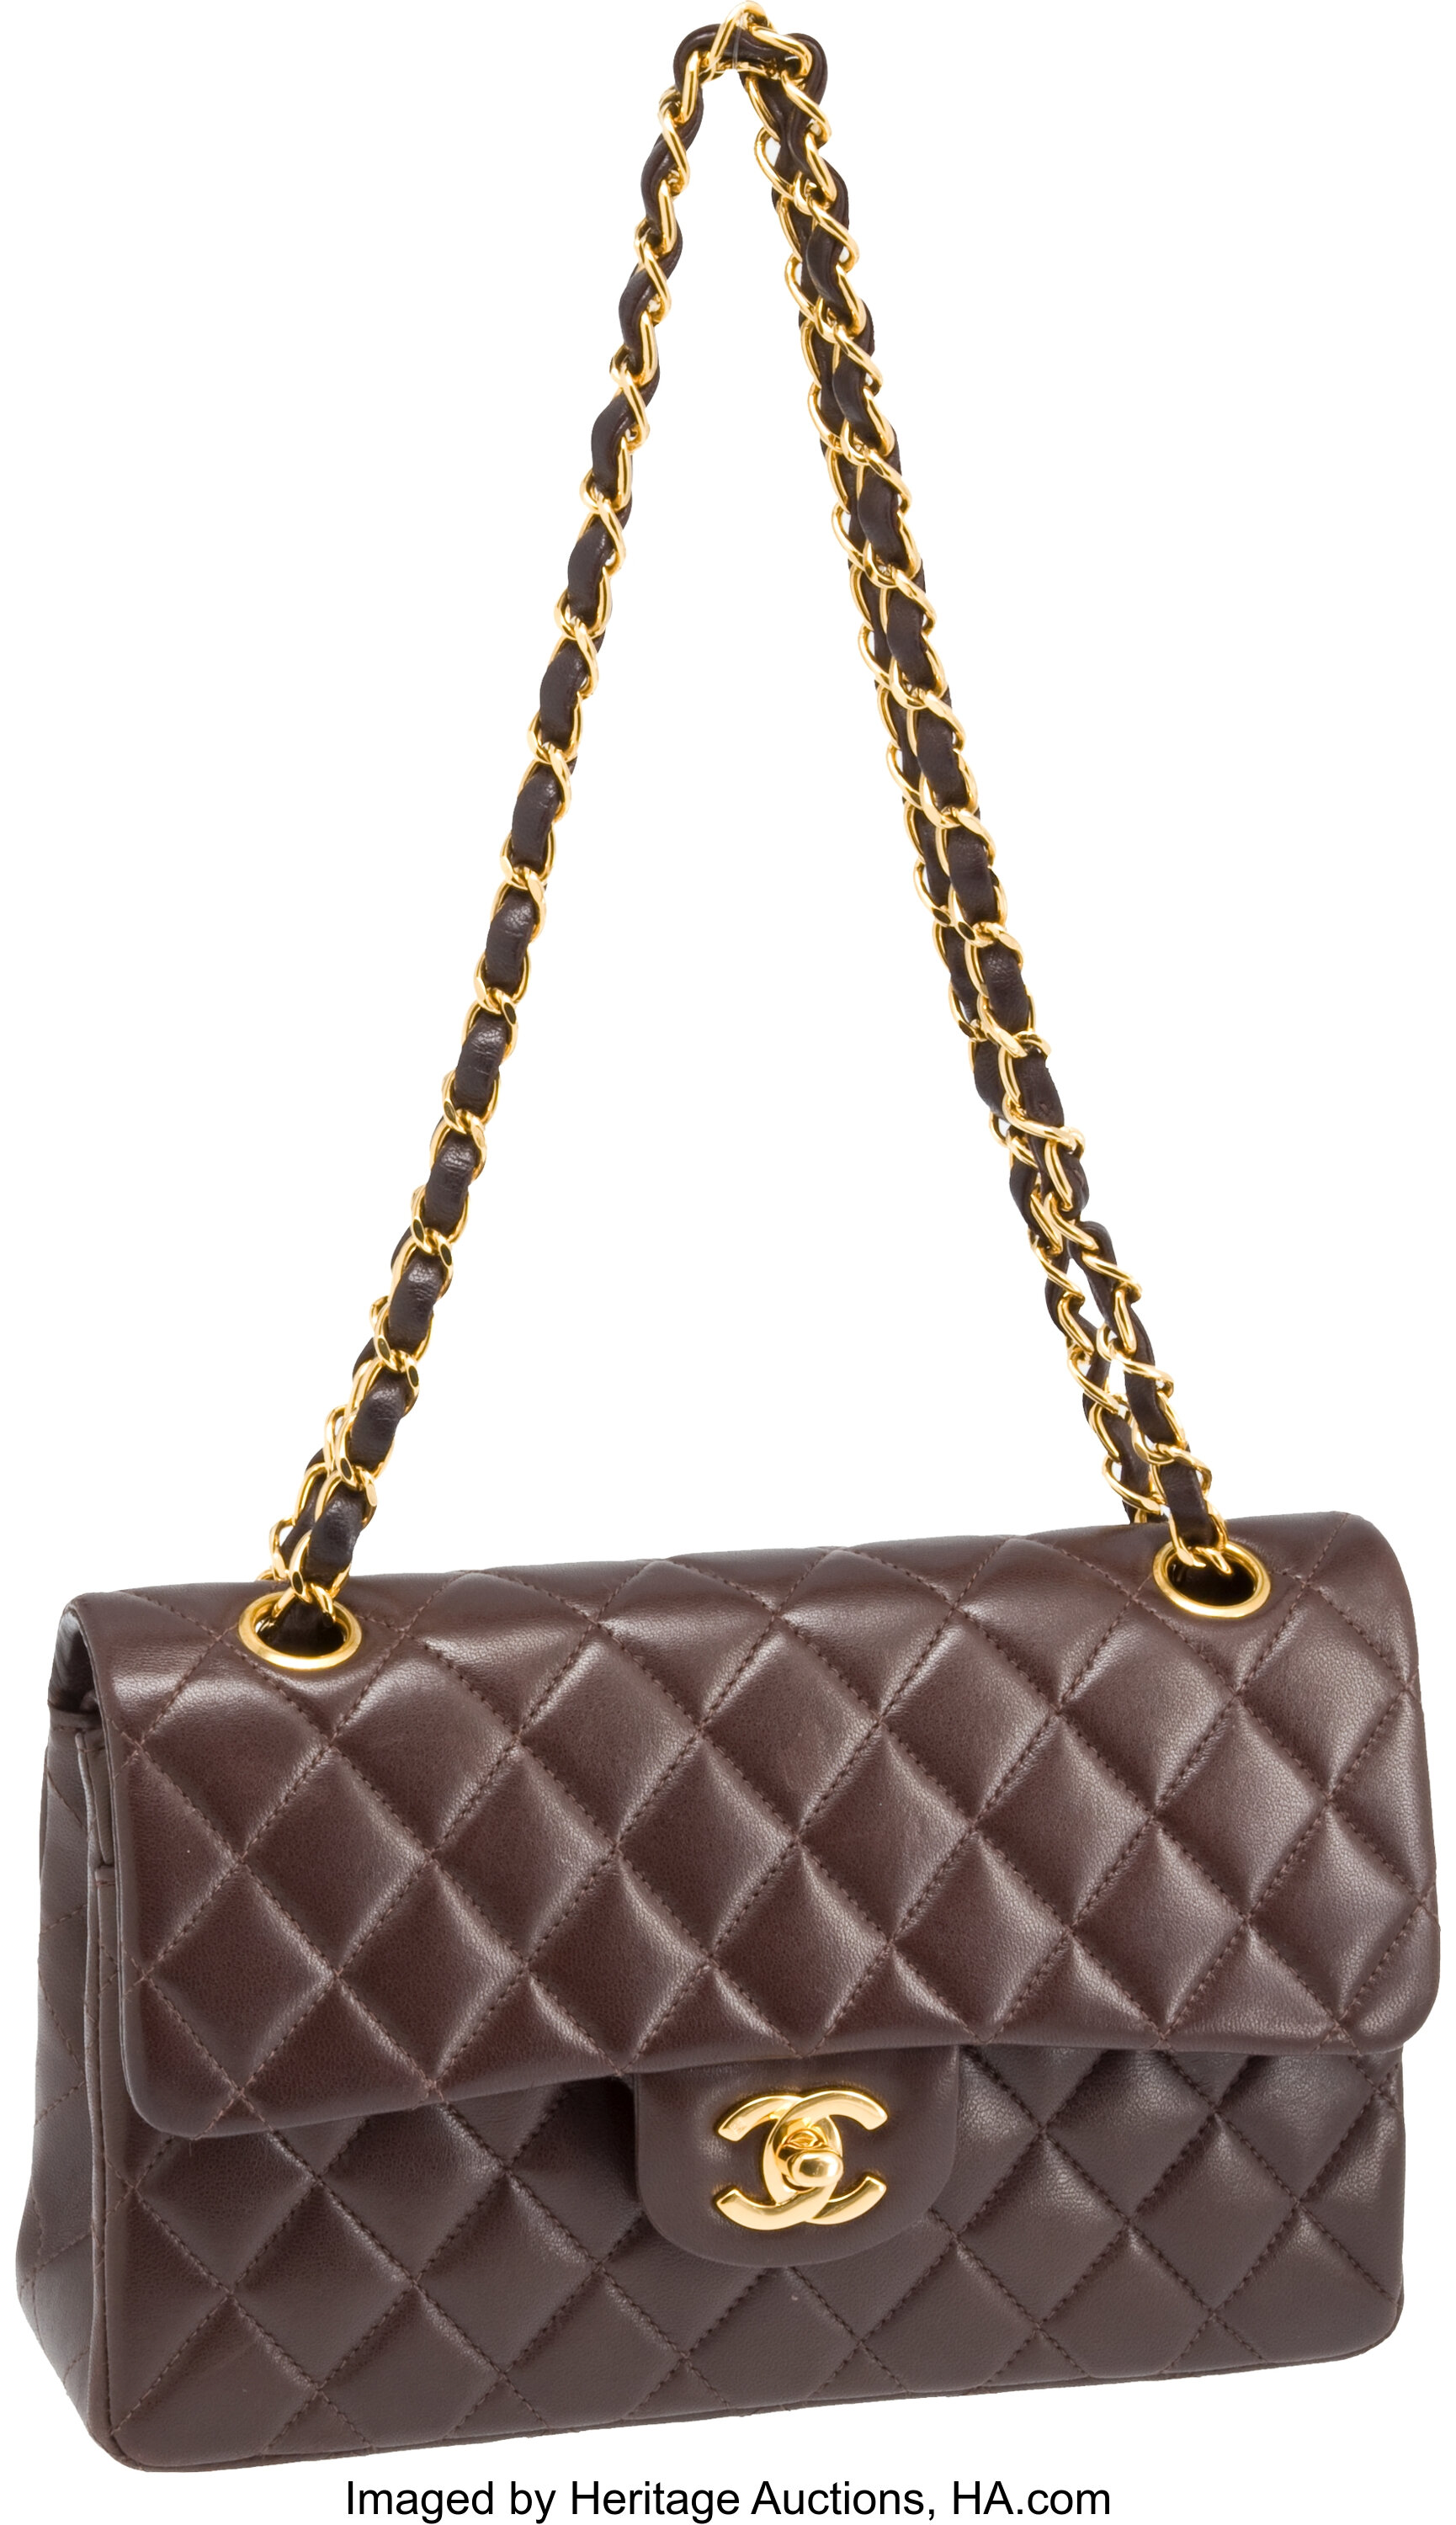 Chanel Chocolate Brown Quilted Lambskin Leather Medium Double Flap